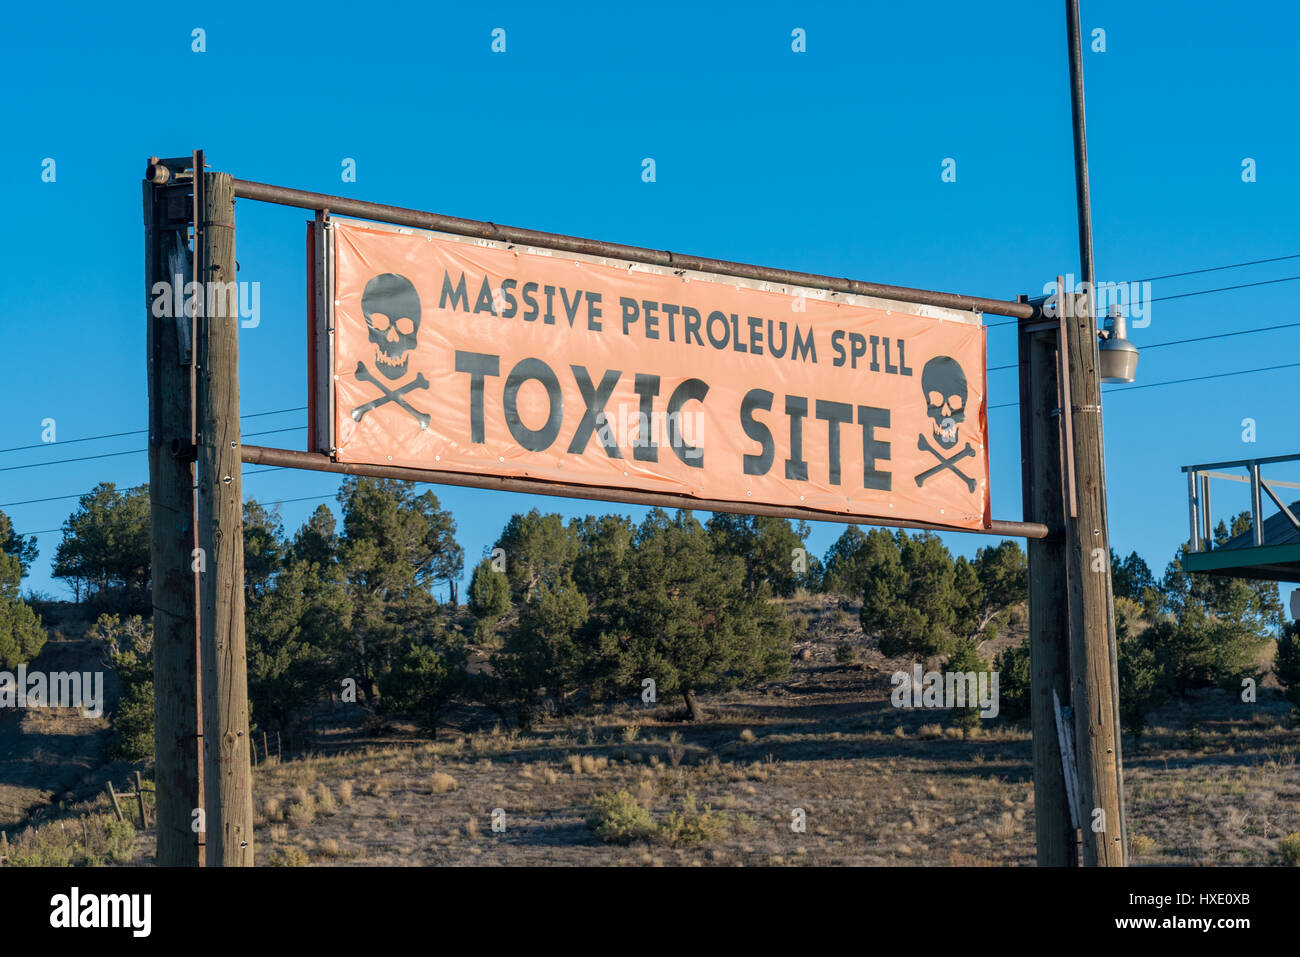 Toxic Site sign at petroleum spill Stock Photo